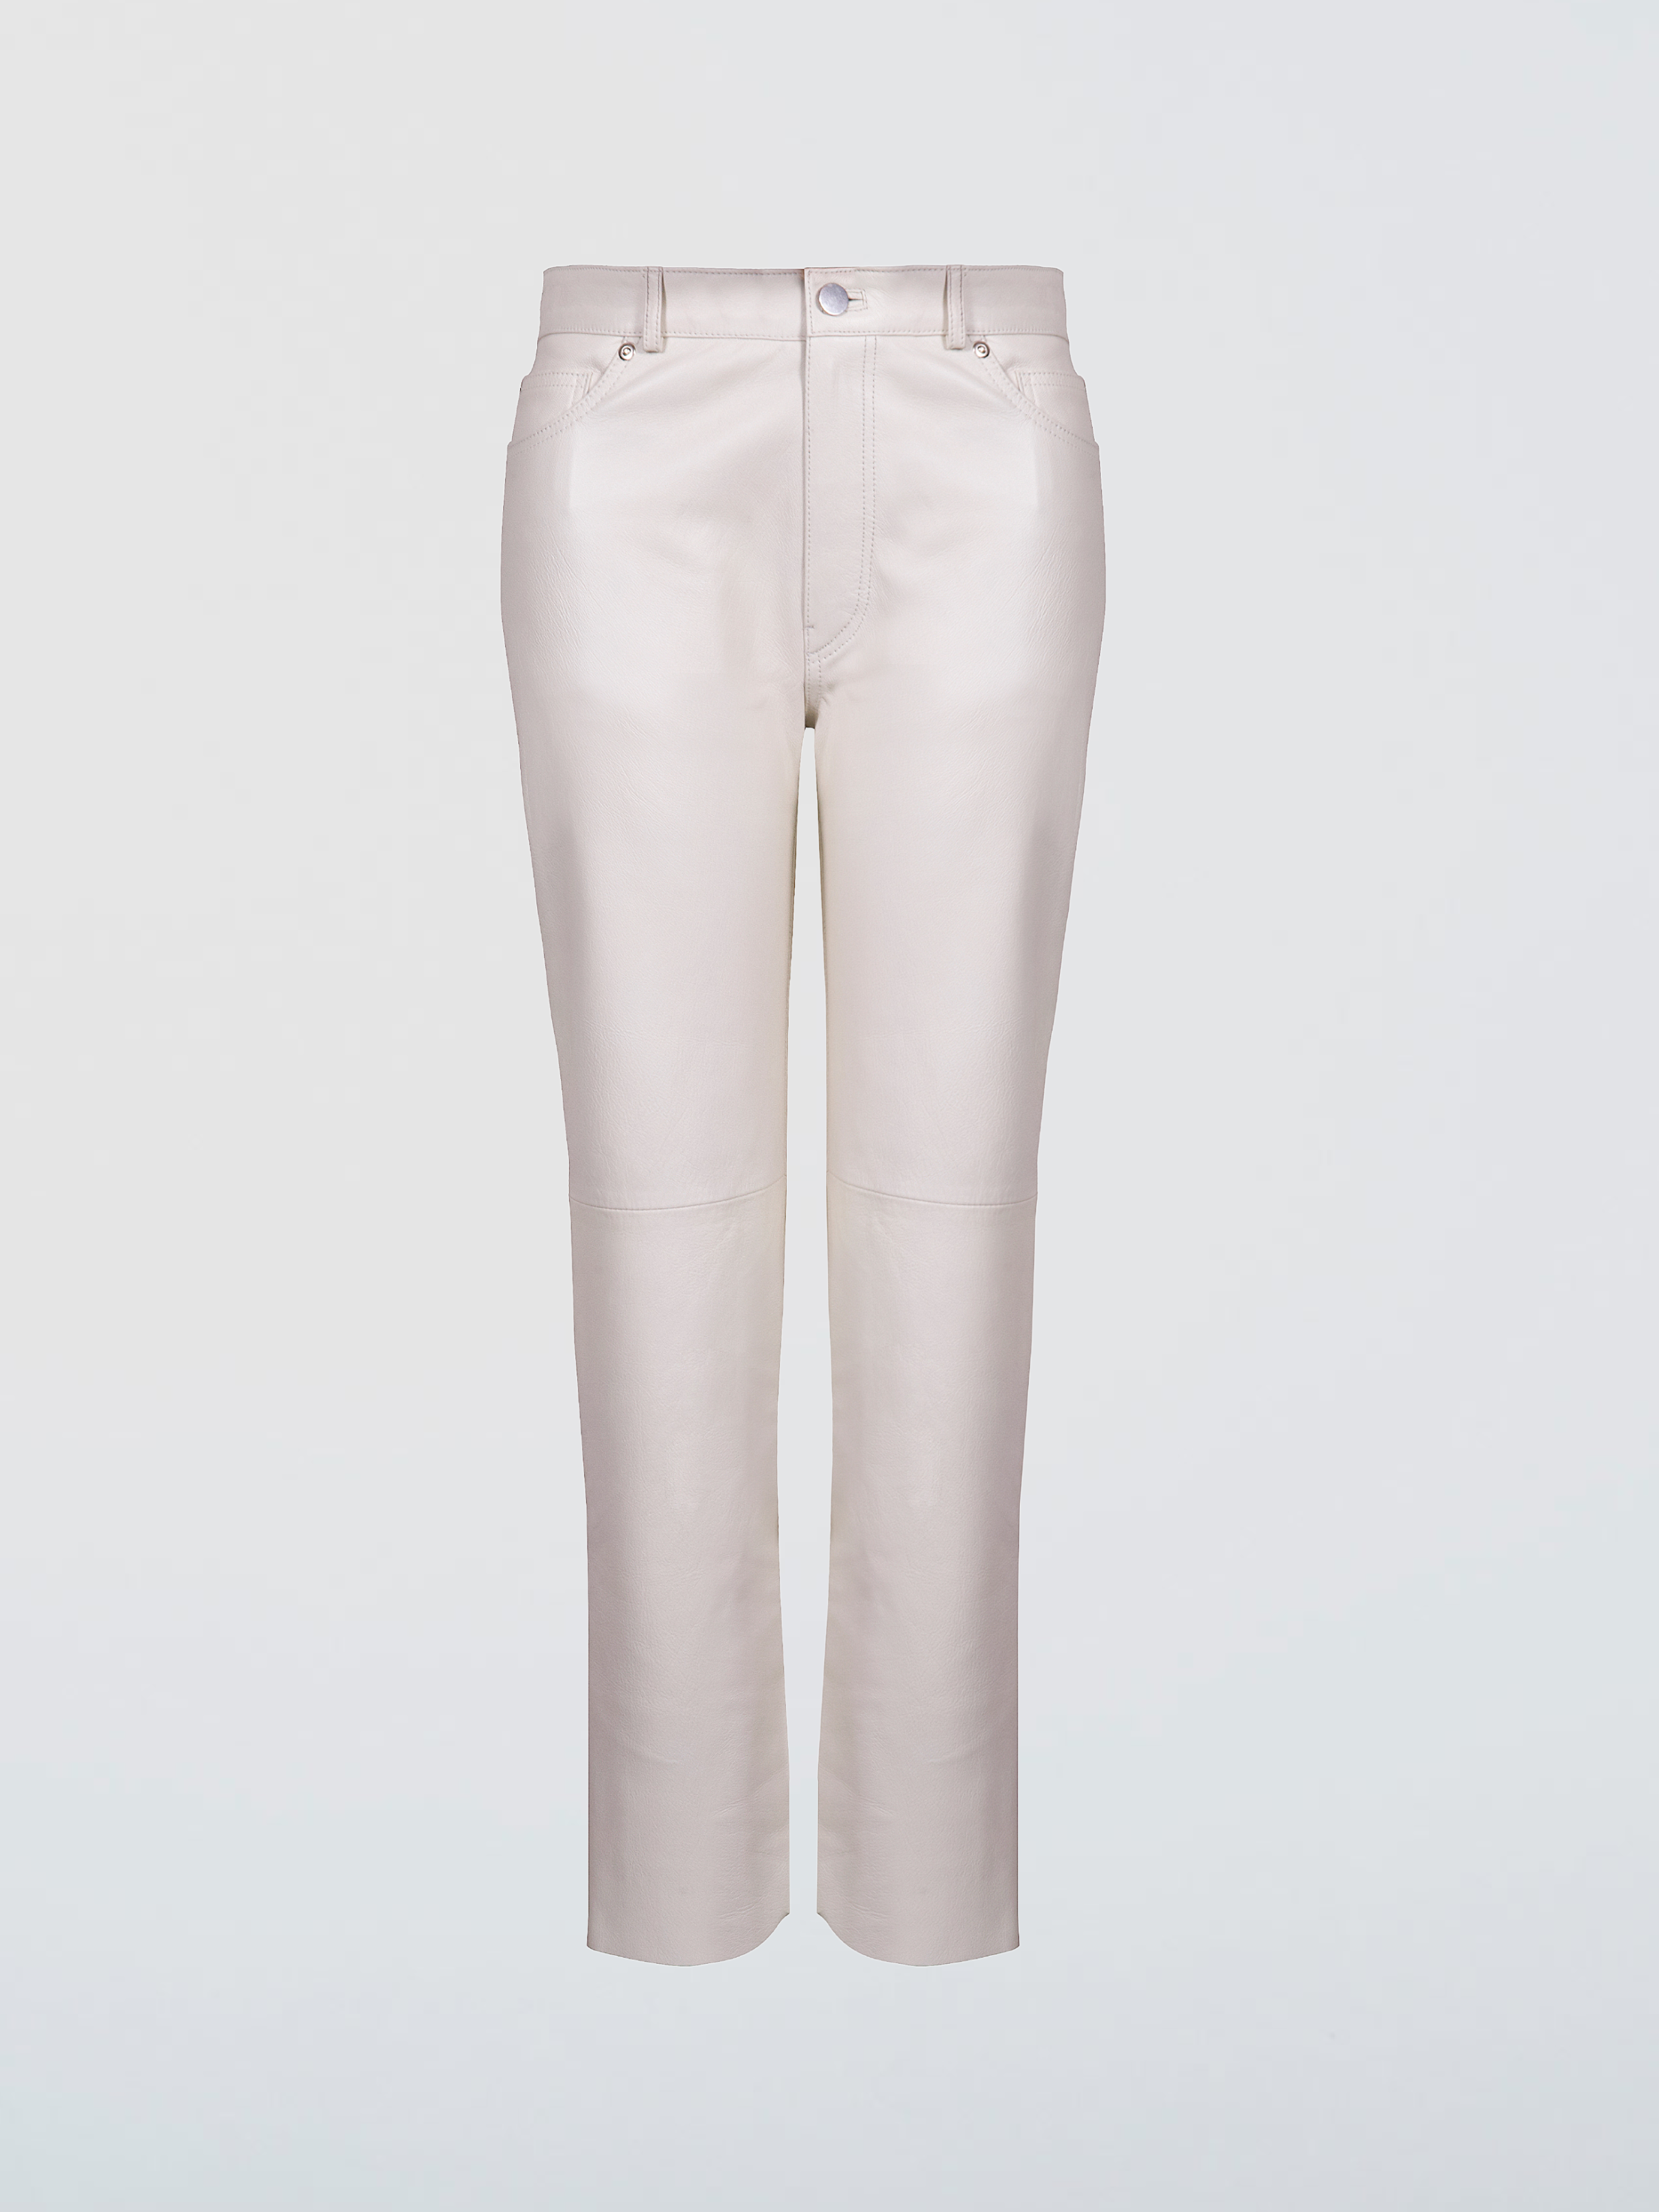 TATE LEATHER PANT - COCONUT